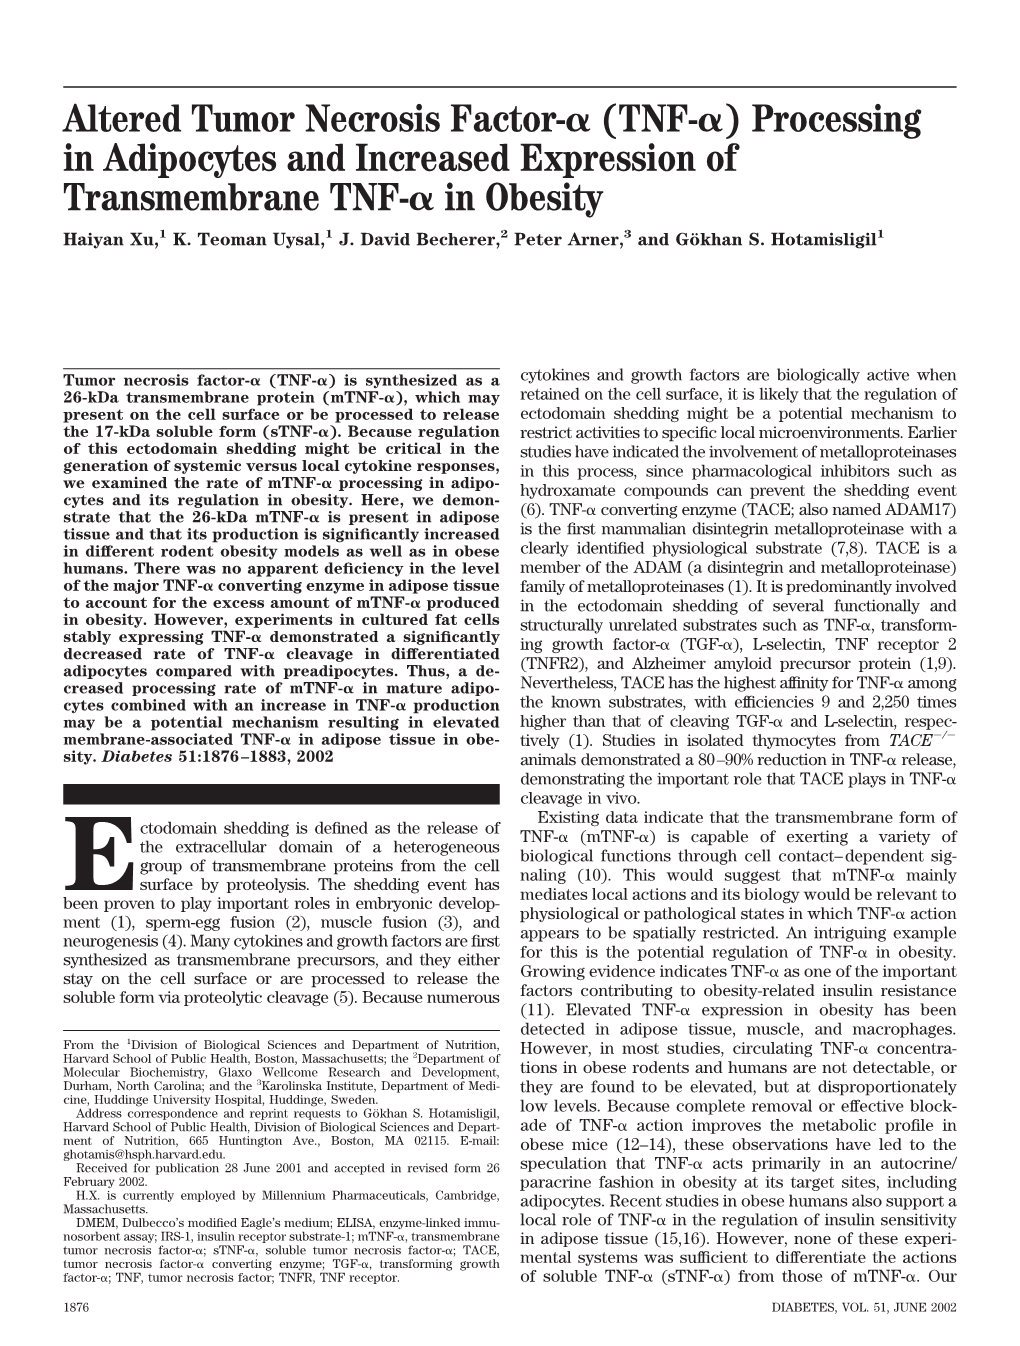 TNF-␣) Processing in Adipocytes and Increased Expression of Transmembrane TNF-␣ in Obesity Haiyan Xu,1 K